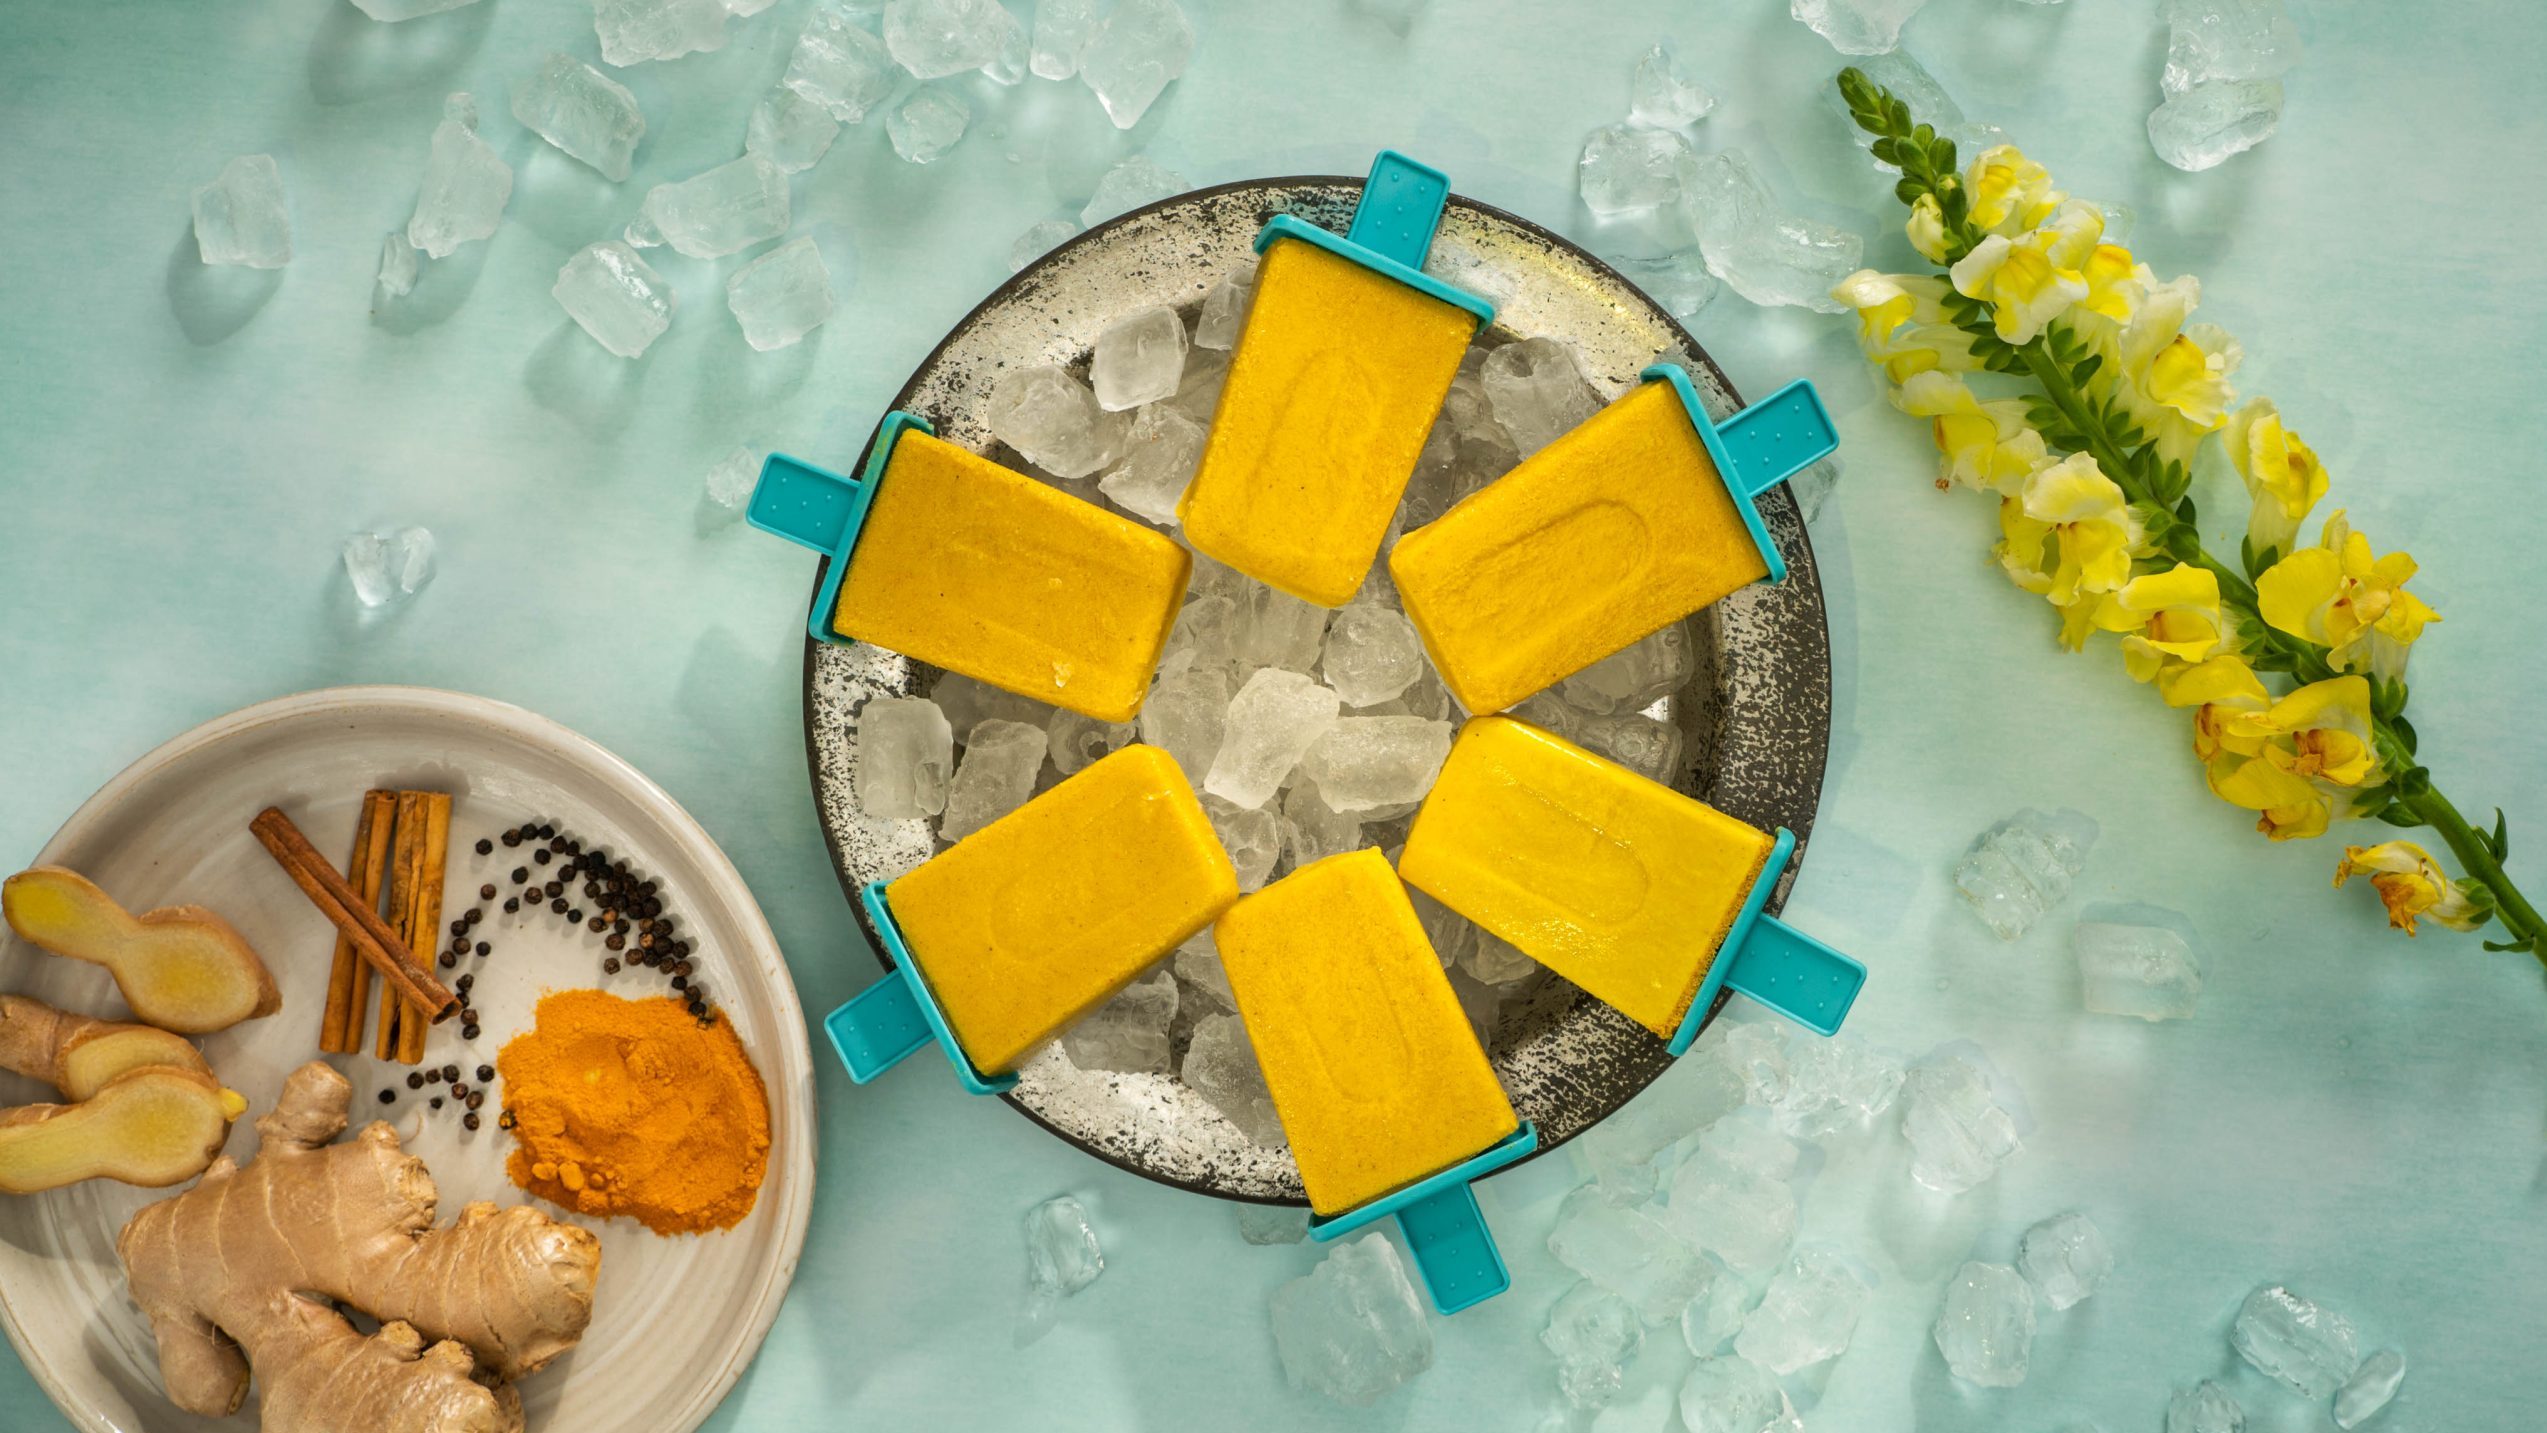 Yellow ice blocks on a plate srounded by ice cubes, flower and spices.